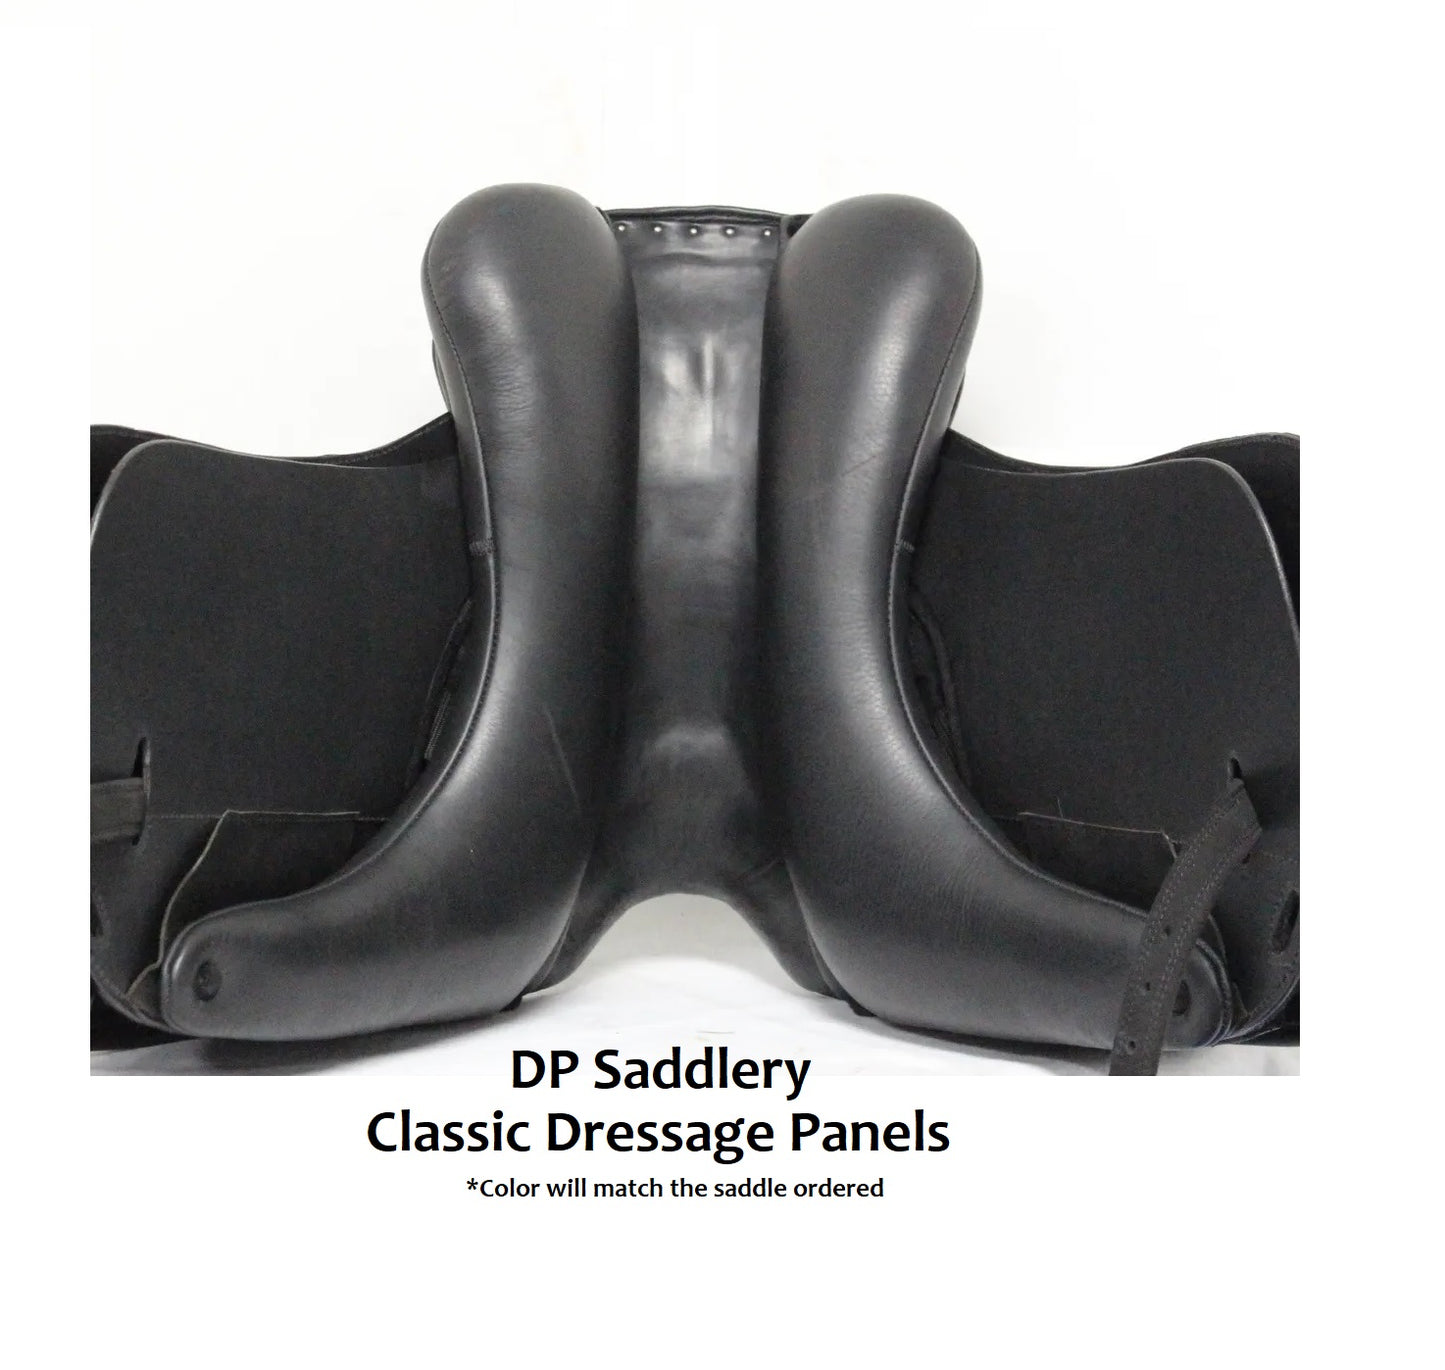 DP Saddlery Classic Dressage 6858 17 in